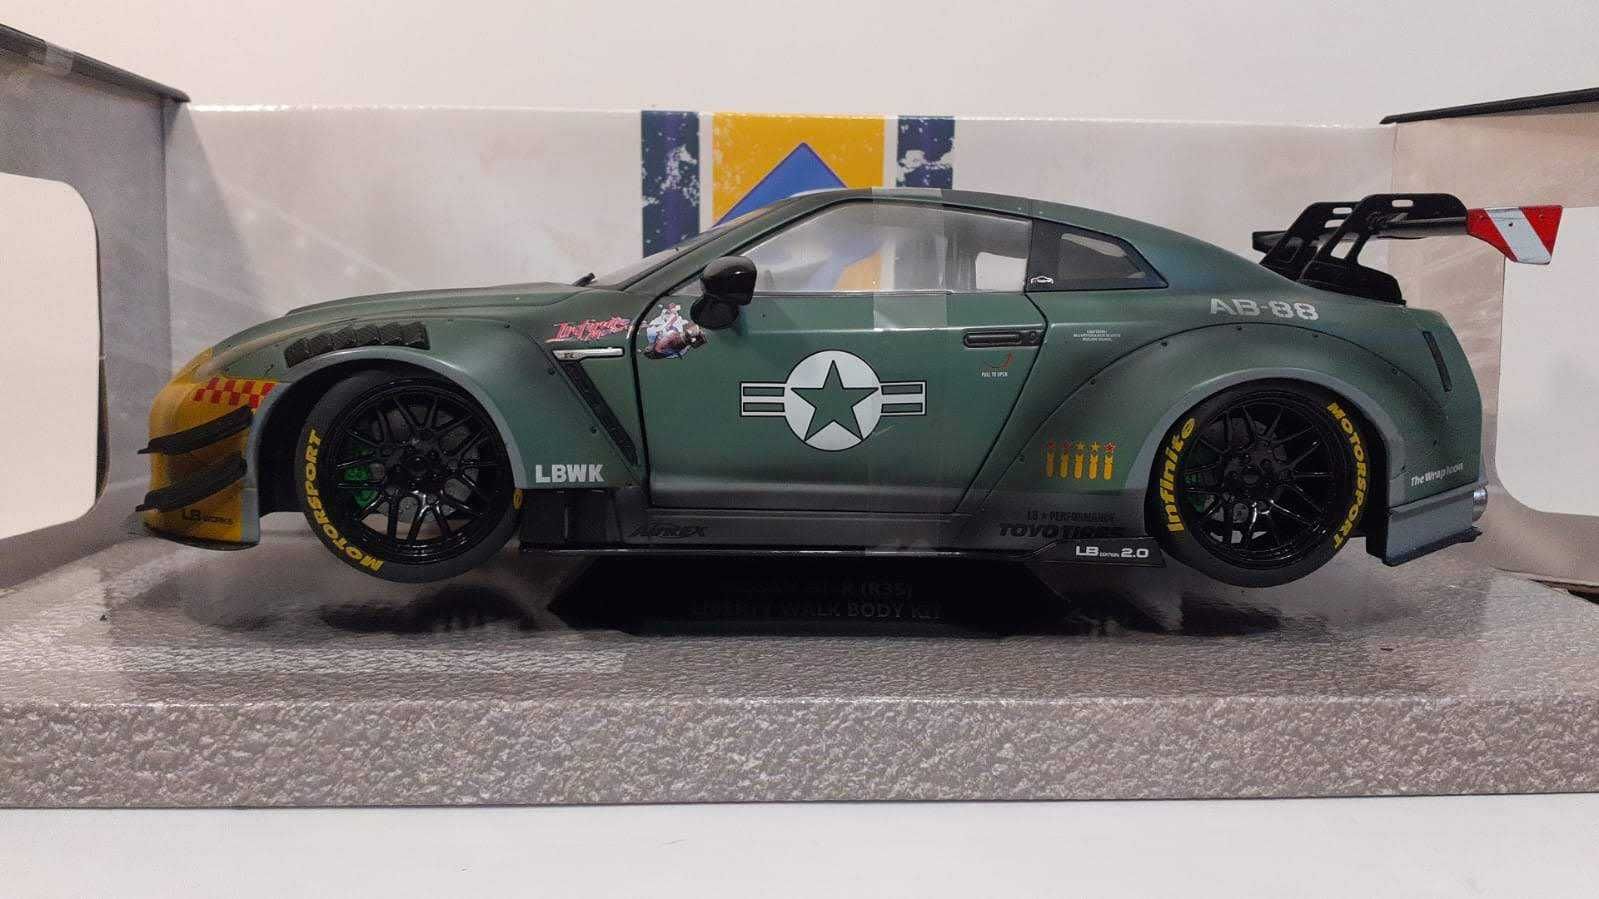 1/18 Nissan GTR 35 LB Work  Army Fighter - Solido